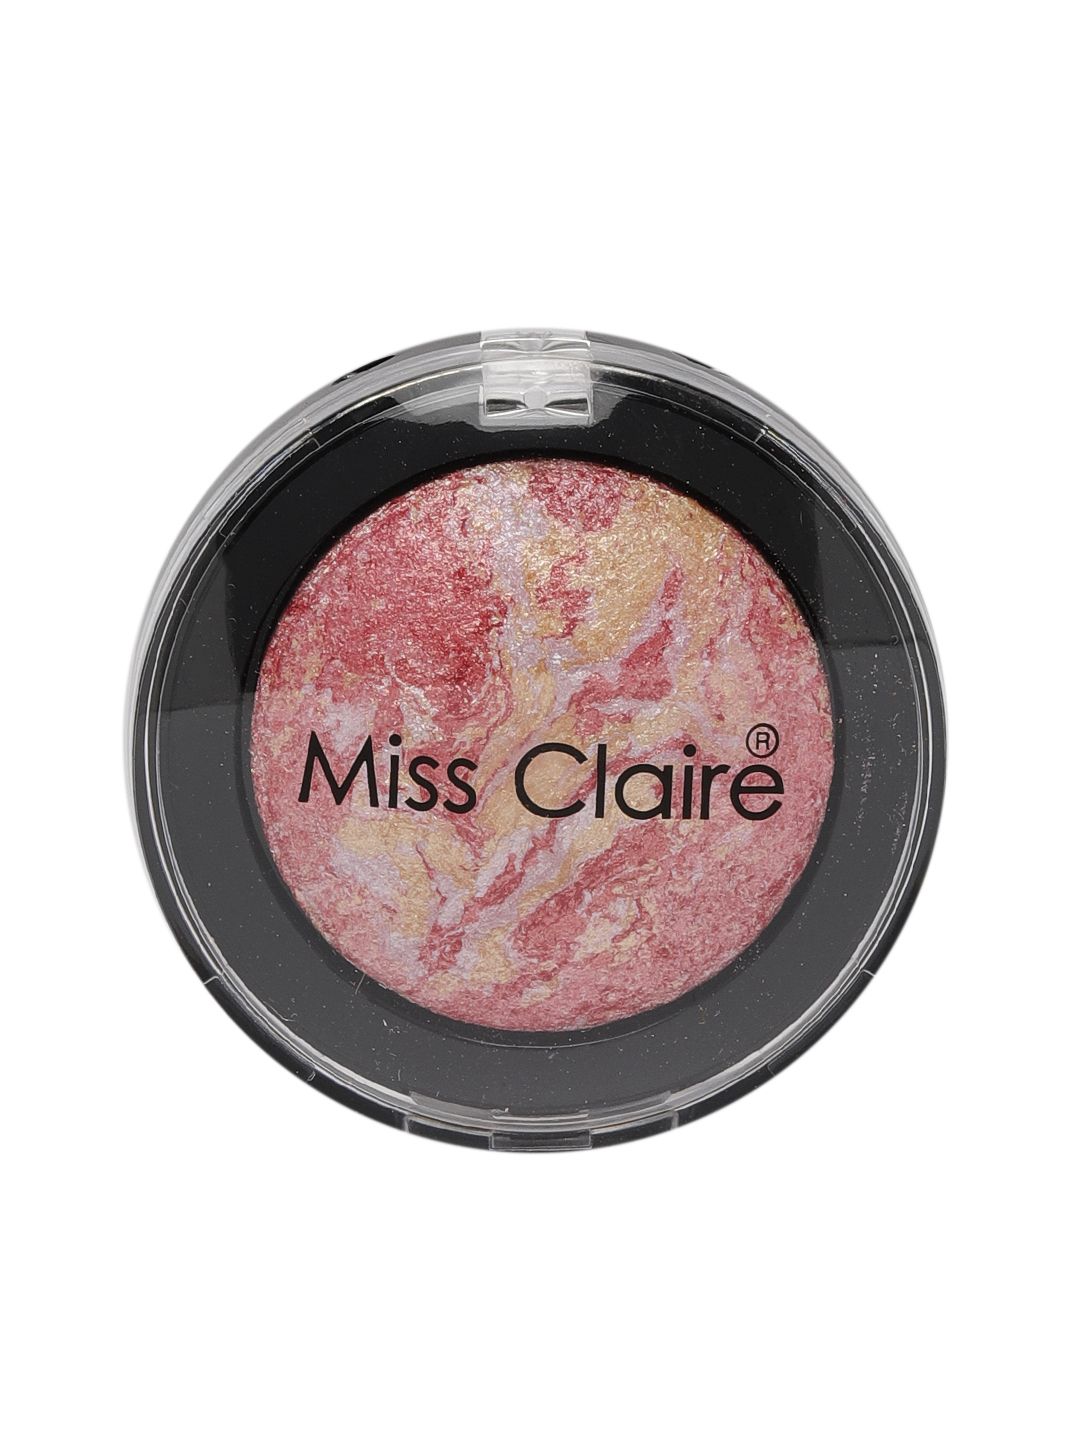 Miss Claire 03 Baked Duo Eyeshadow 3.5 g Price in India